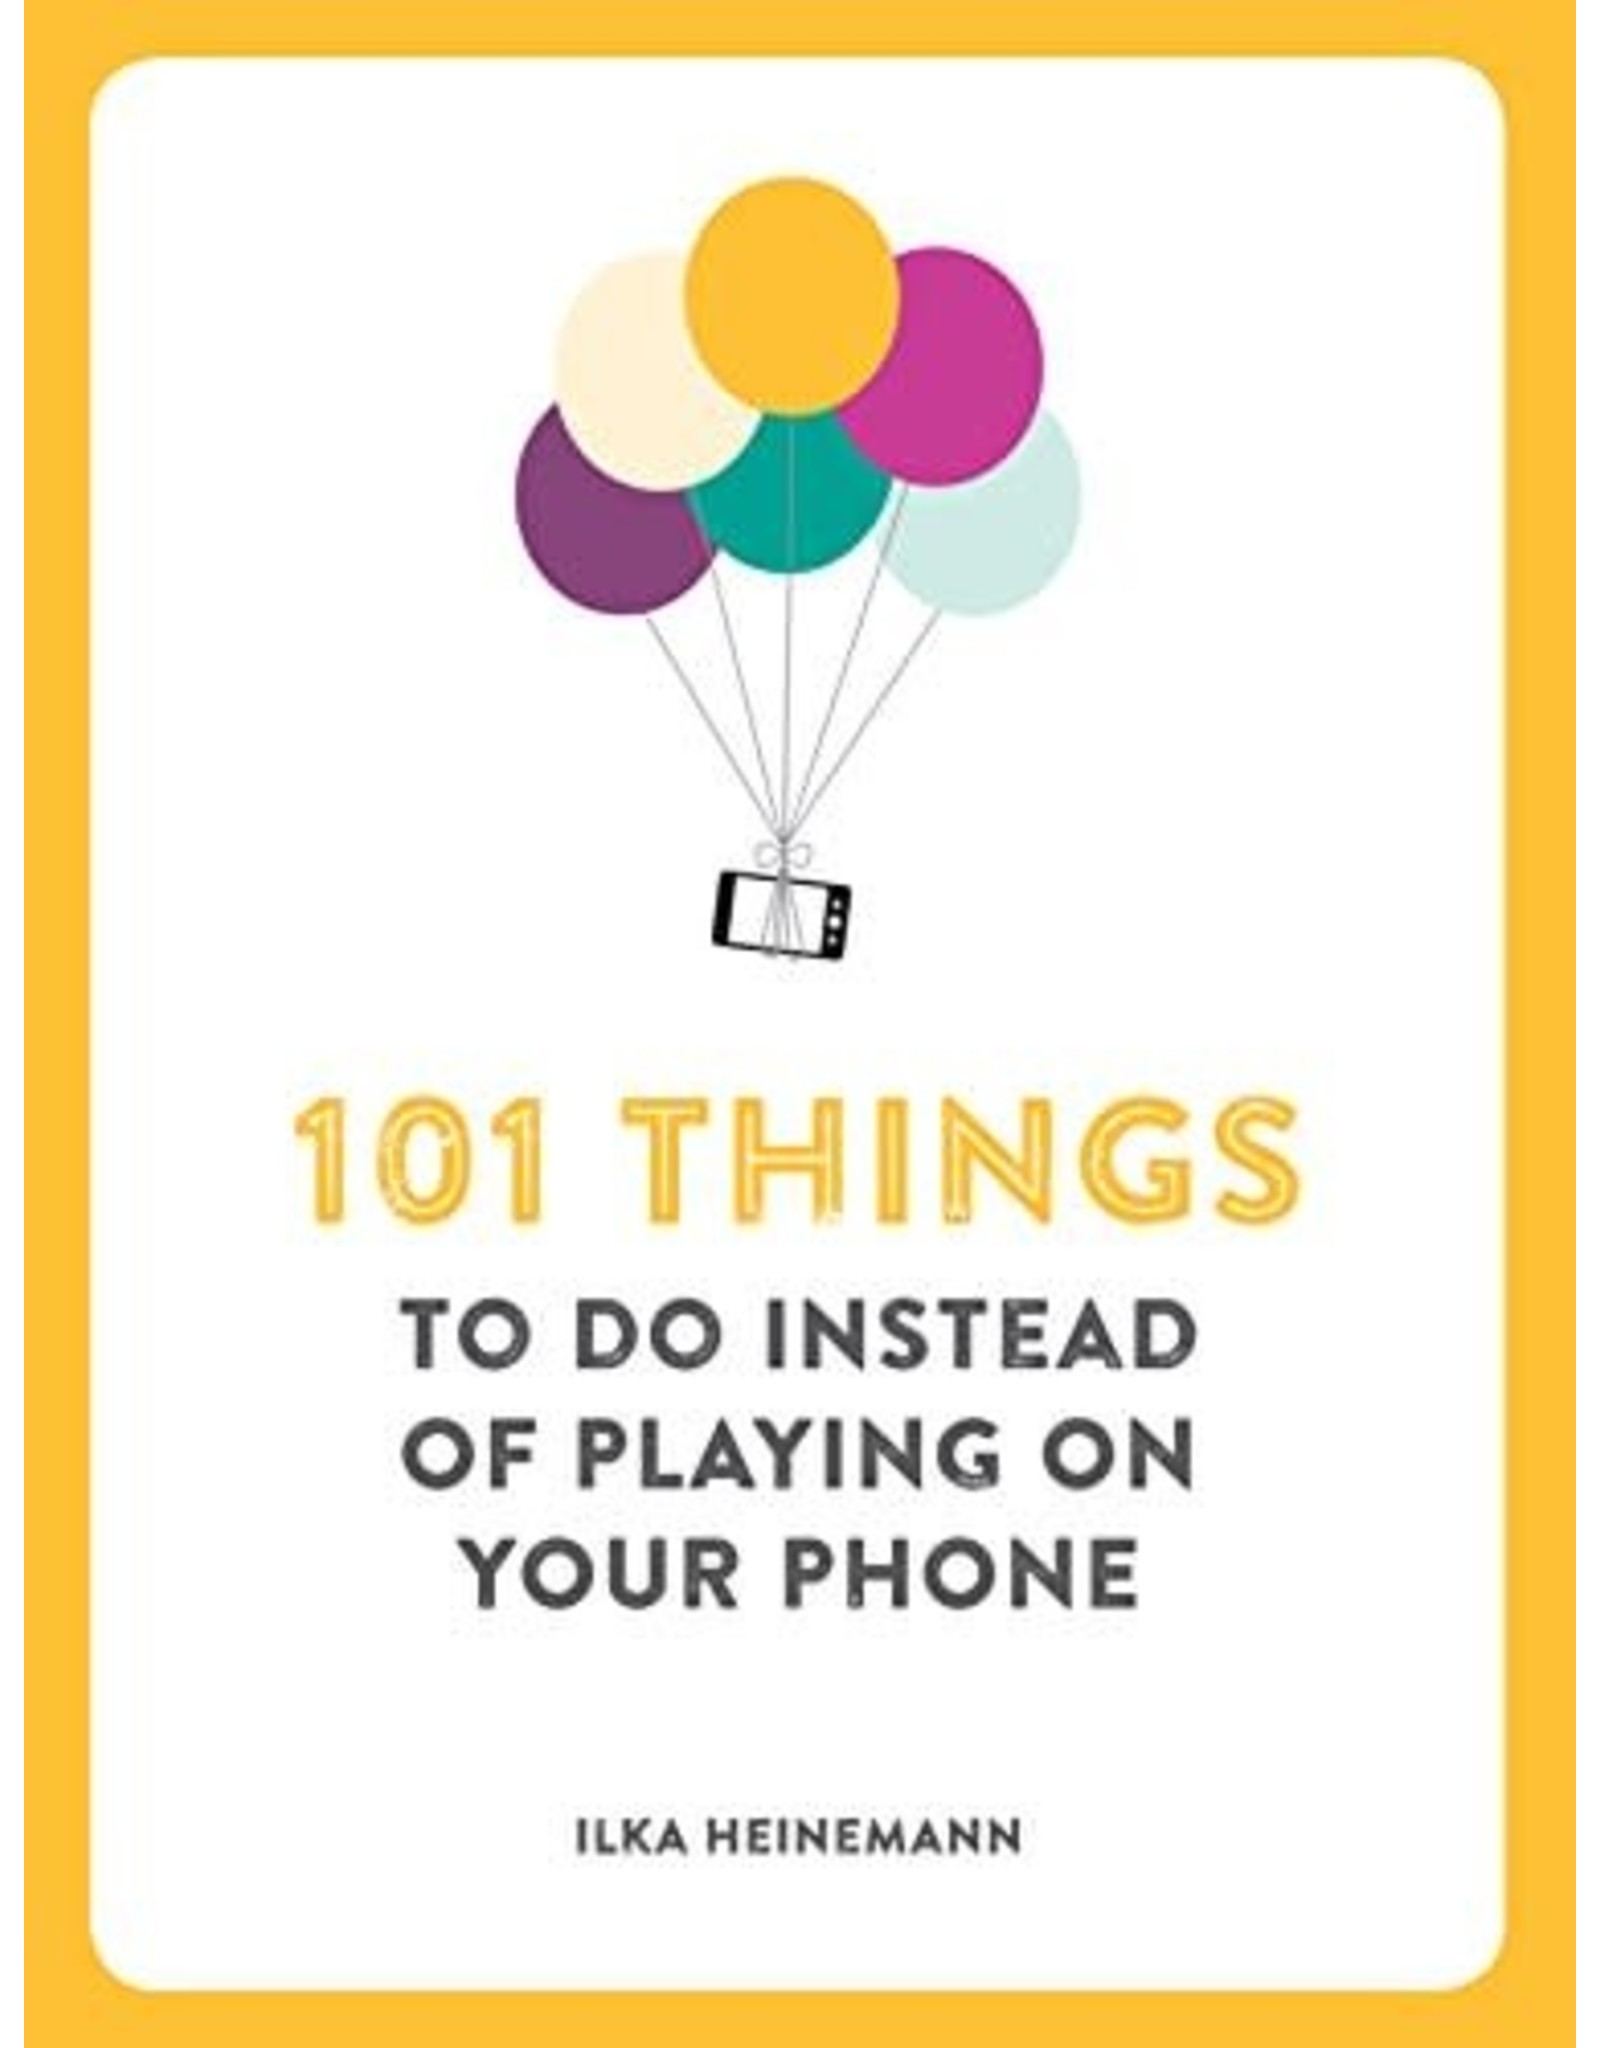 Brumby Sunstate 101 Things To Do Instead Of Playing On Your Phone - Ilka Heinemann